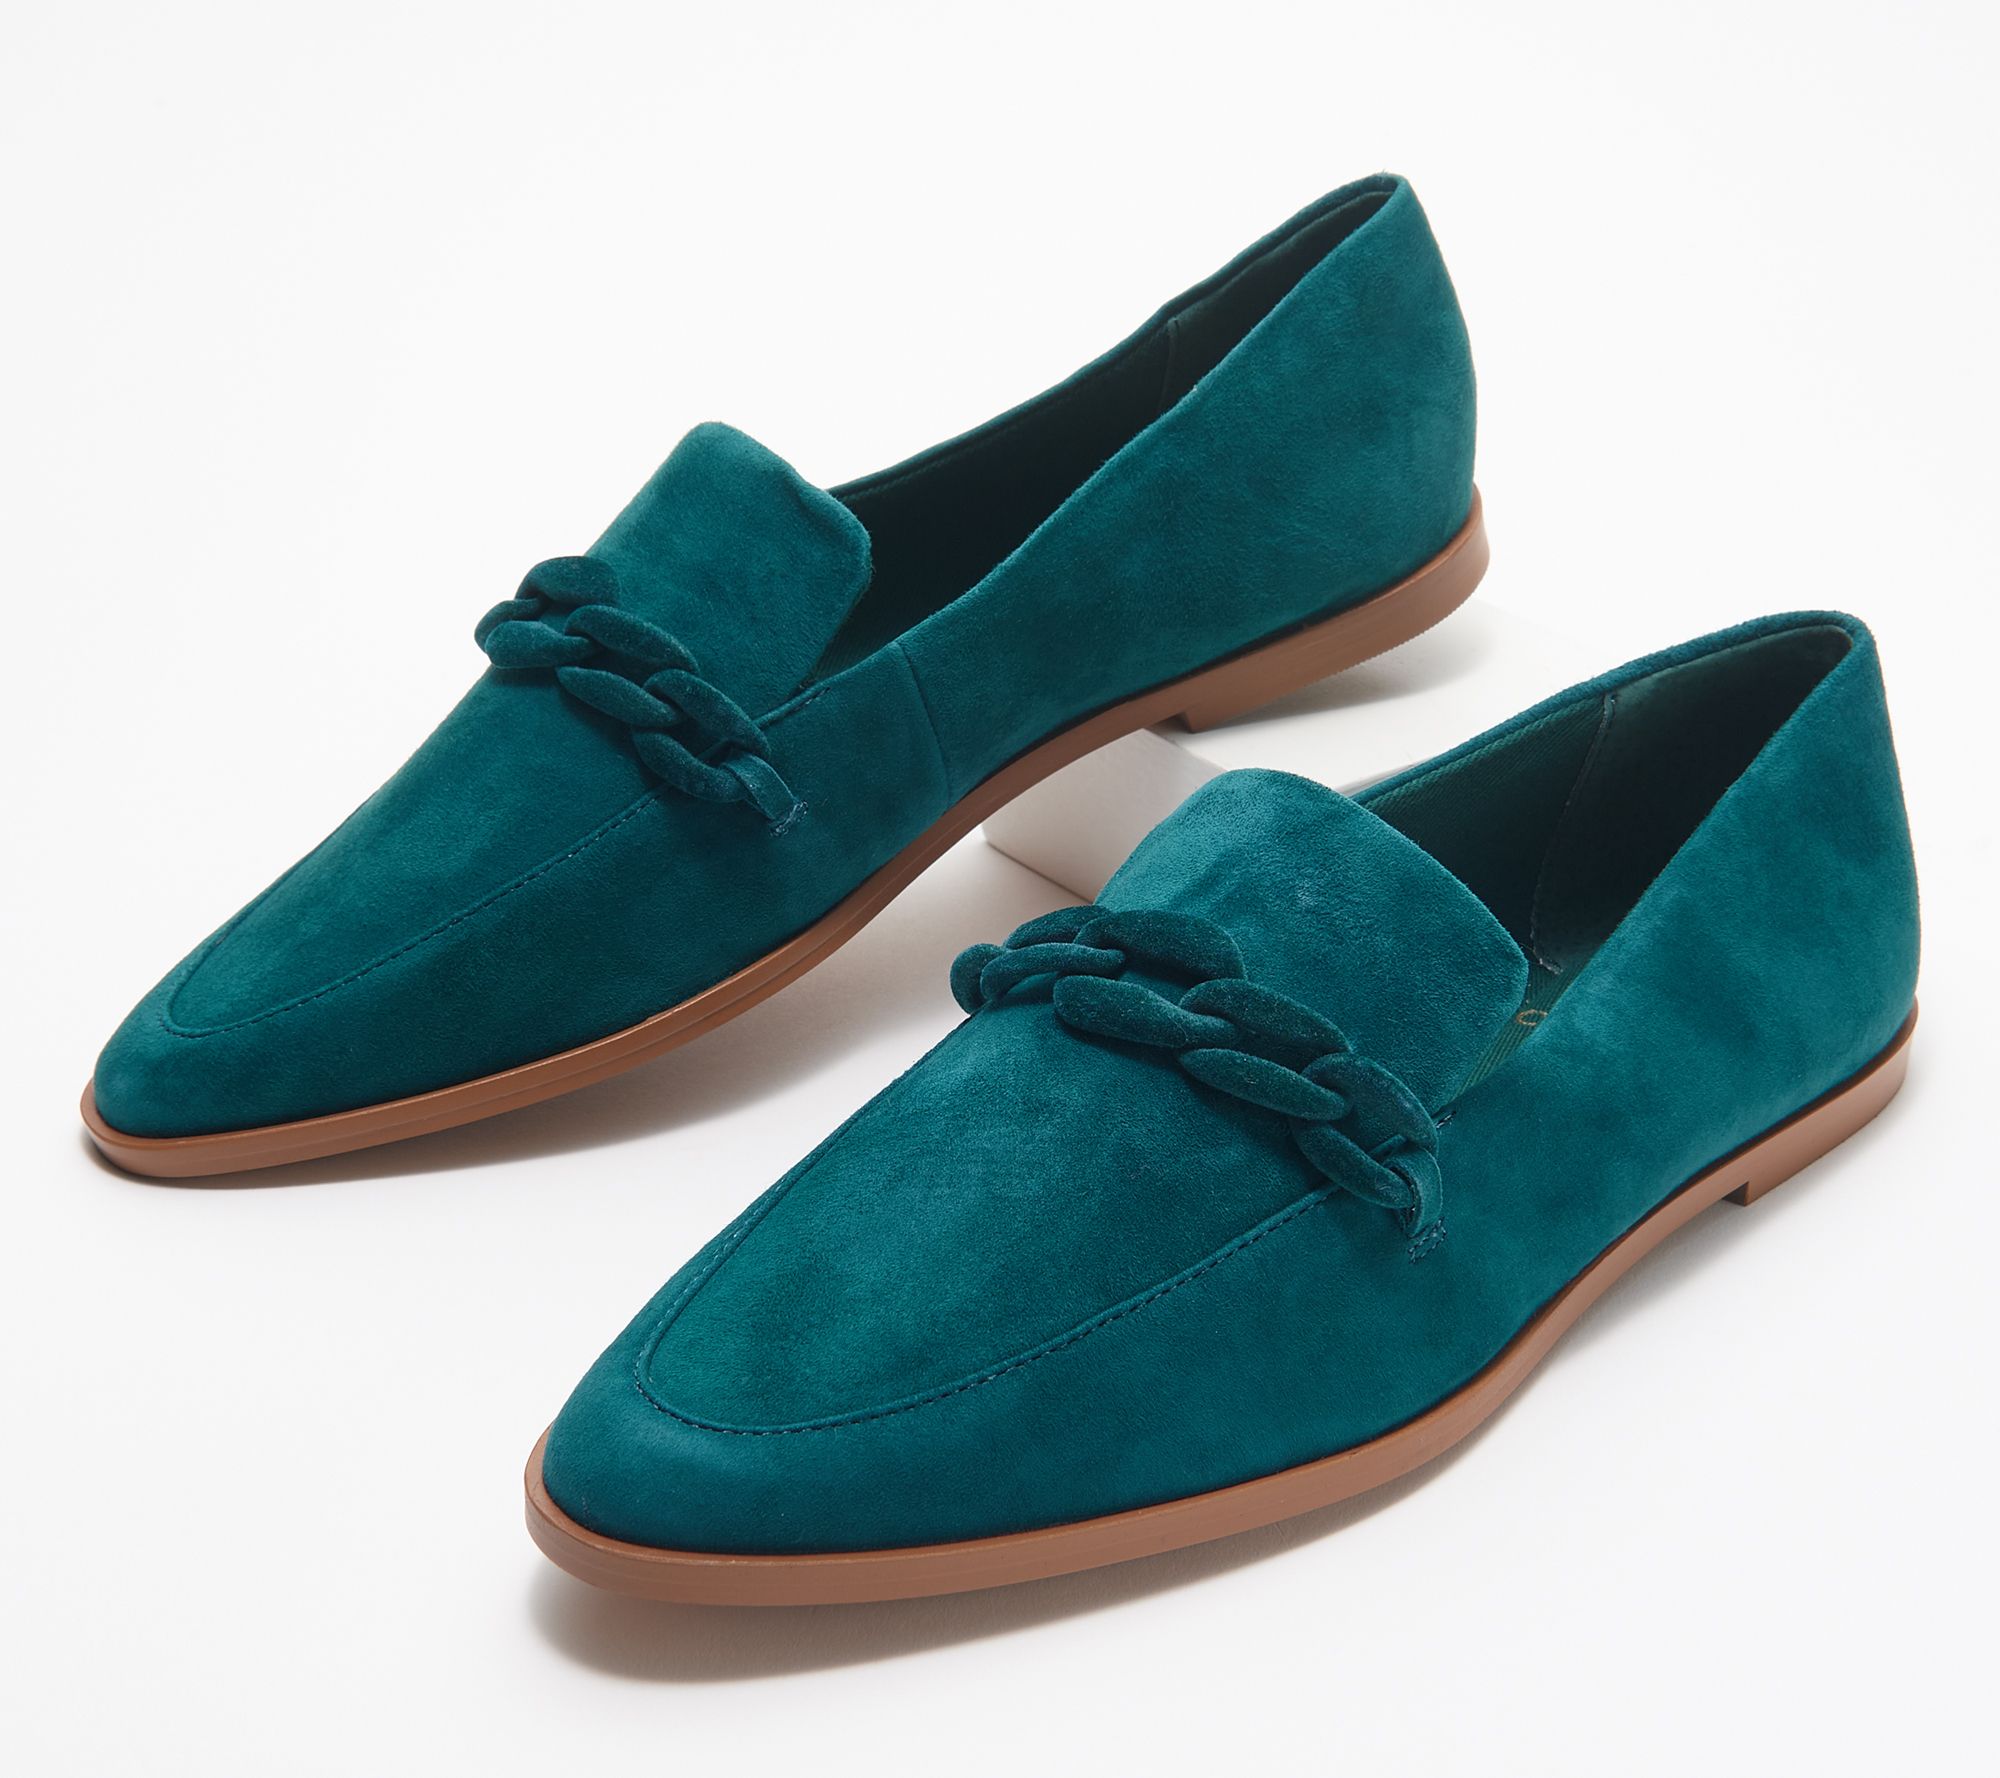 Vince Camuto Pointed Toe Suede Loafers - Foronni - QVC.com